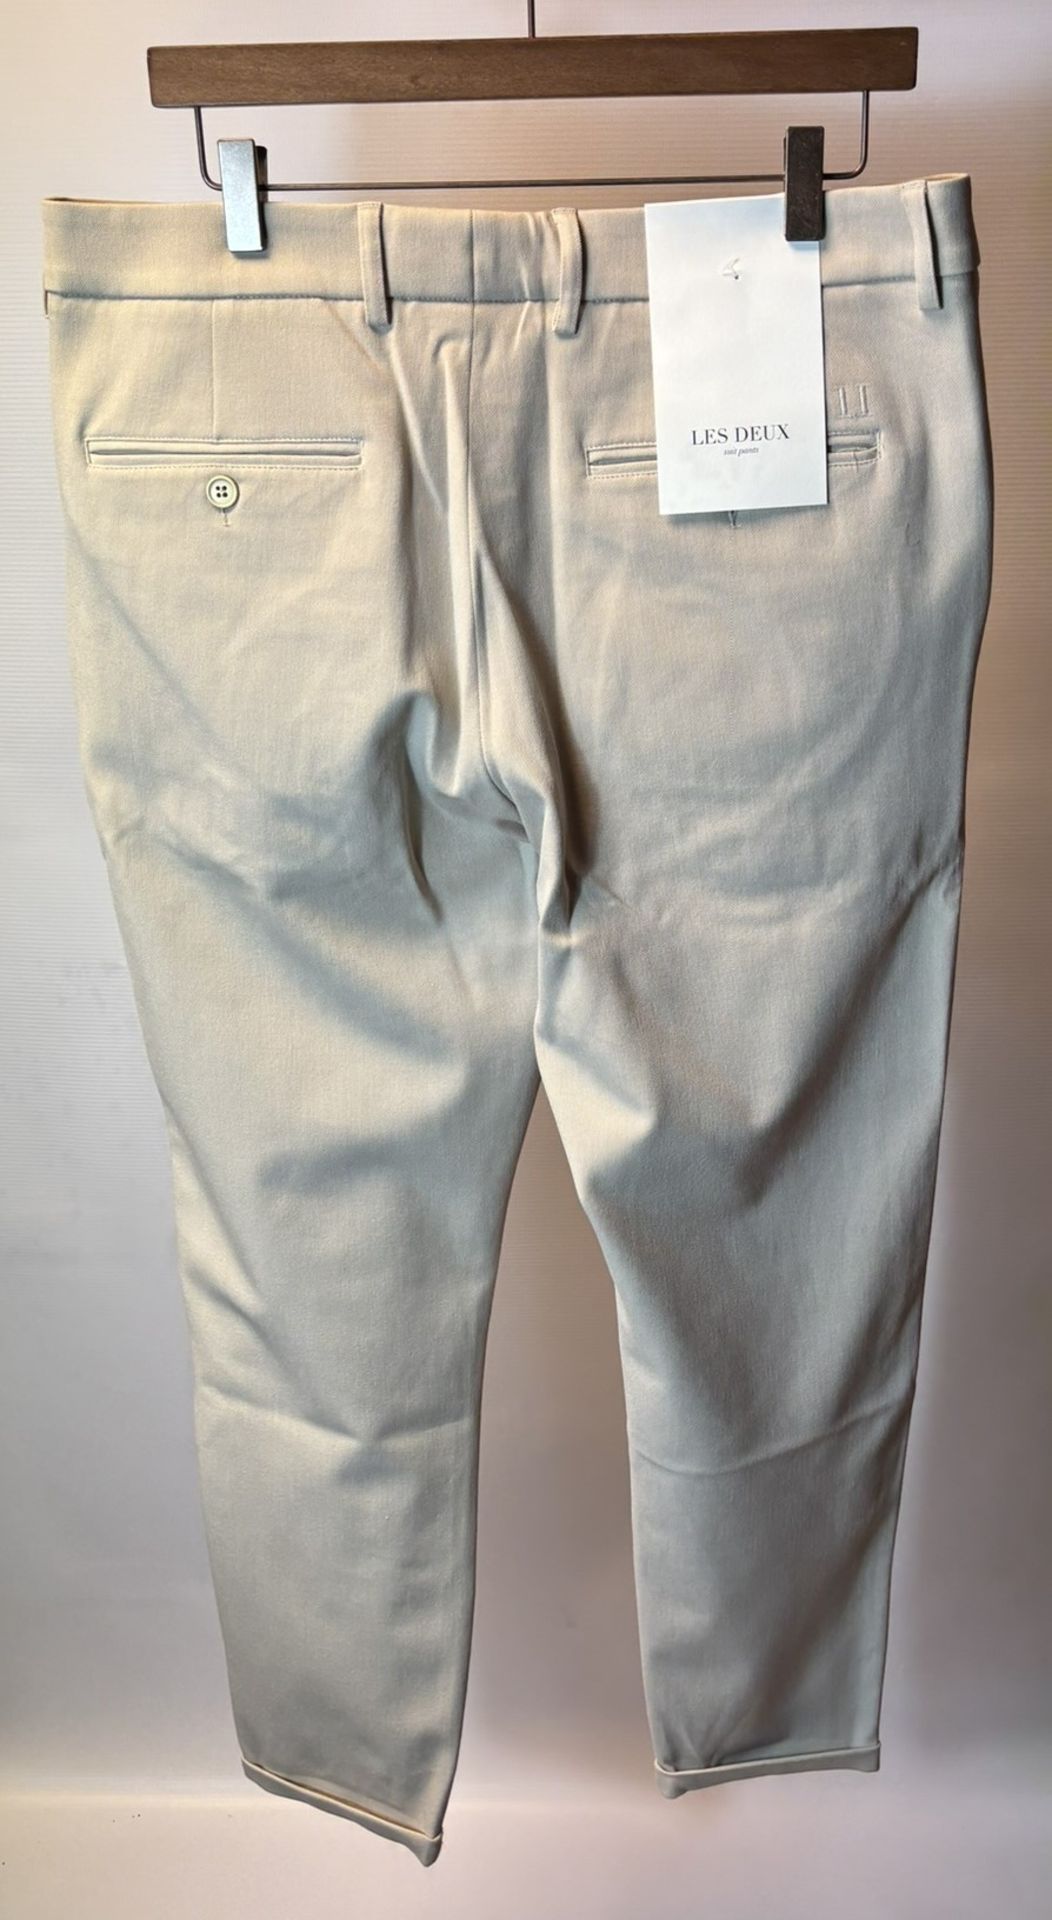 15 x Various Pairs Of Women's Trousers As Seen In Photos - Image 26 of 45